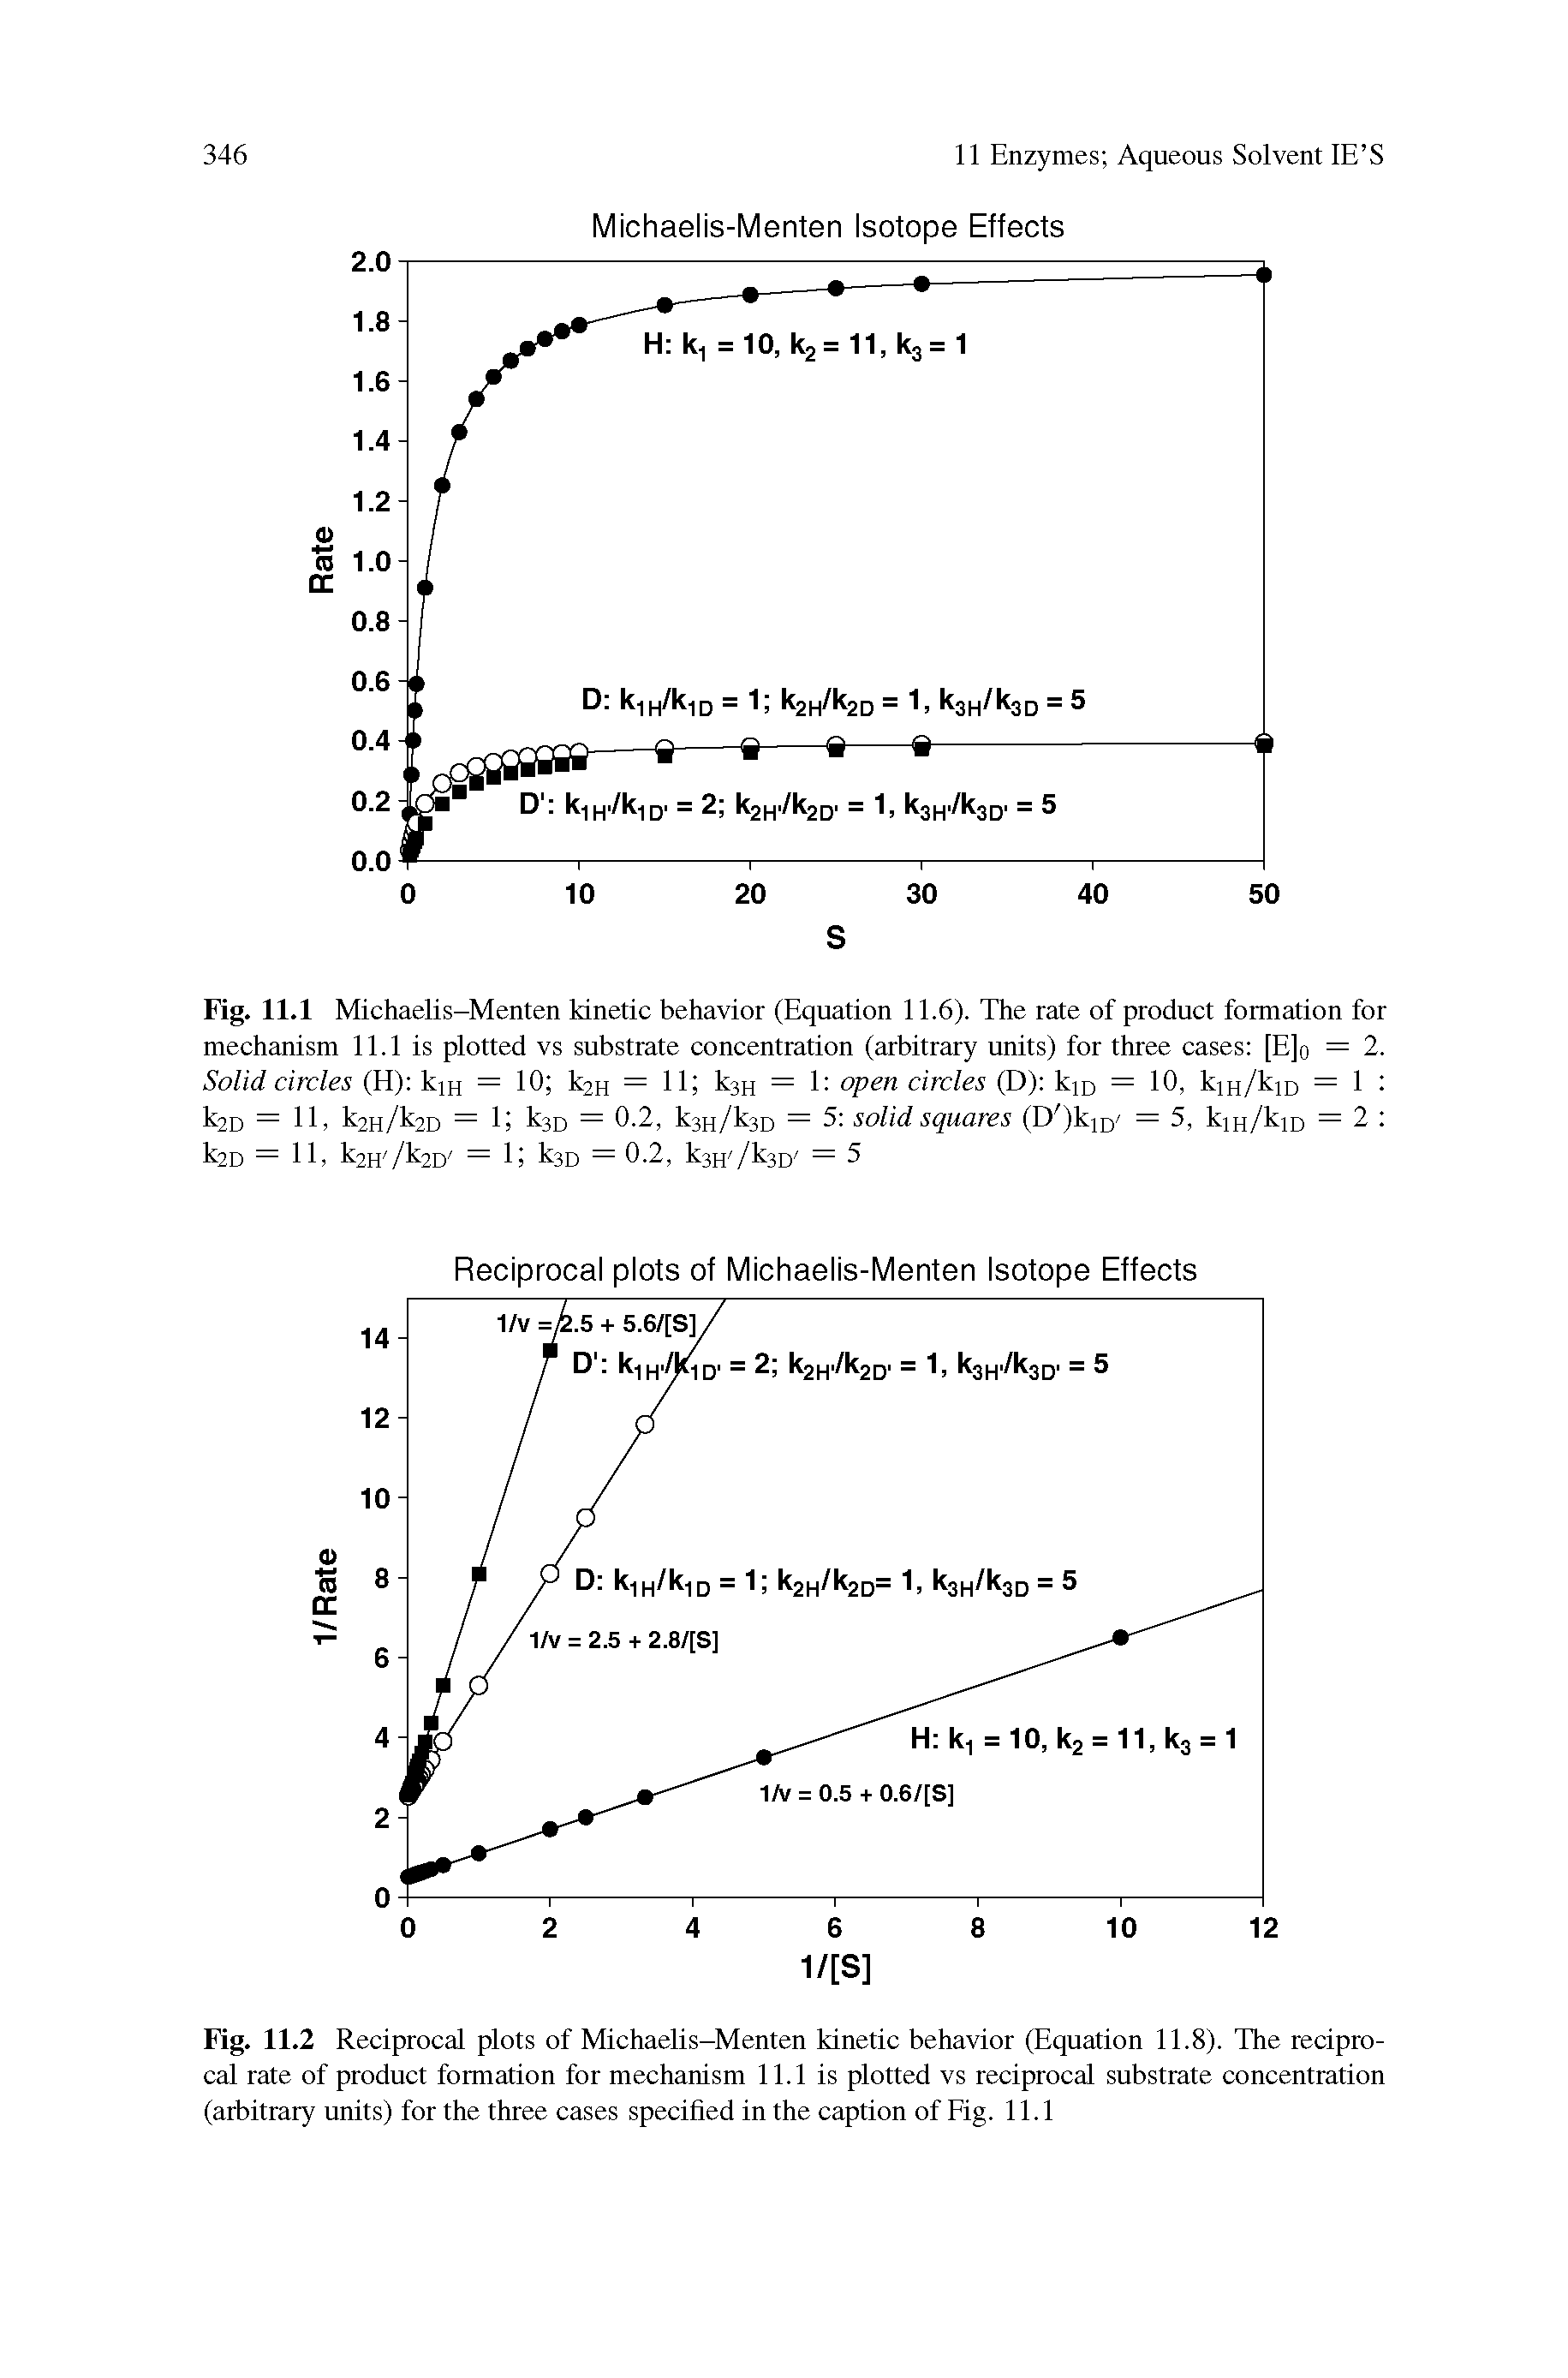 Fig. 11.2 Reciprocal plots of Michaelis-Menten kinetic behavior (Equation 1E8). The reciprocal rate of product formation for mechanism 11.1 is plotted vs reciprocal substrate concentration (arbitrary units) for the three cases specified in the caption of Fig. 11.1...